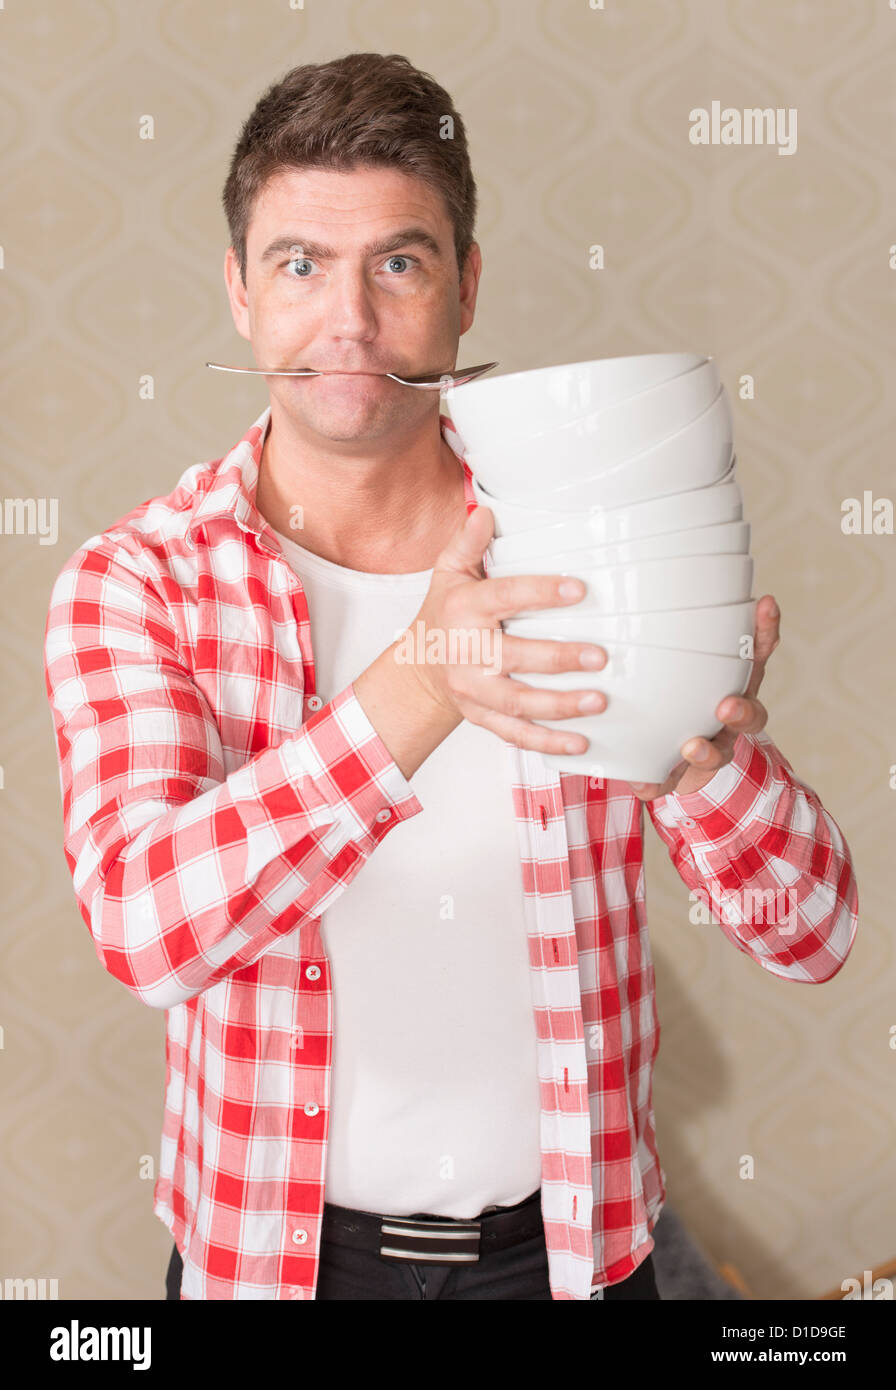 Frustrated adult male preparing meal in a hurry Stock Photo